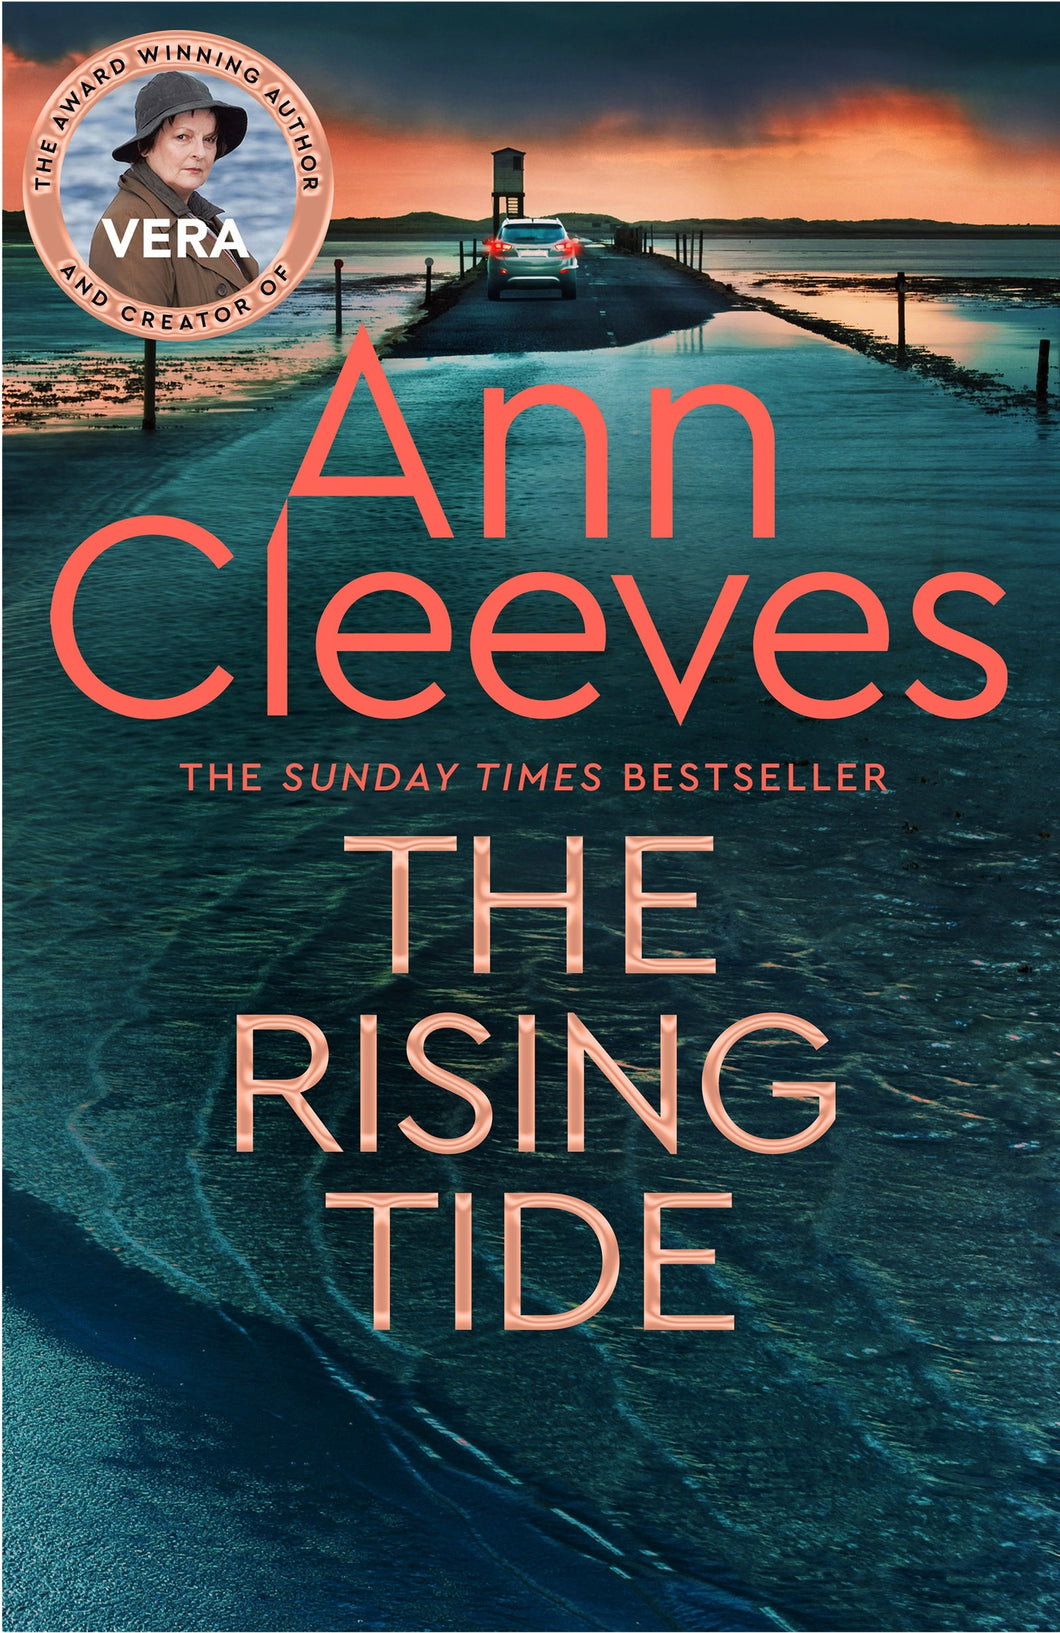 Rising Tide by Ann Cleeves